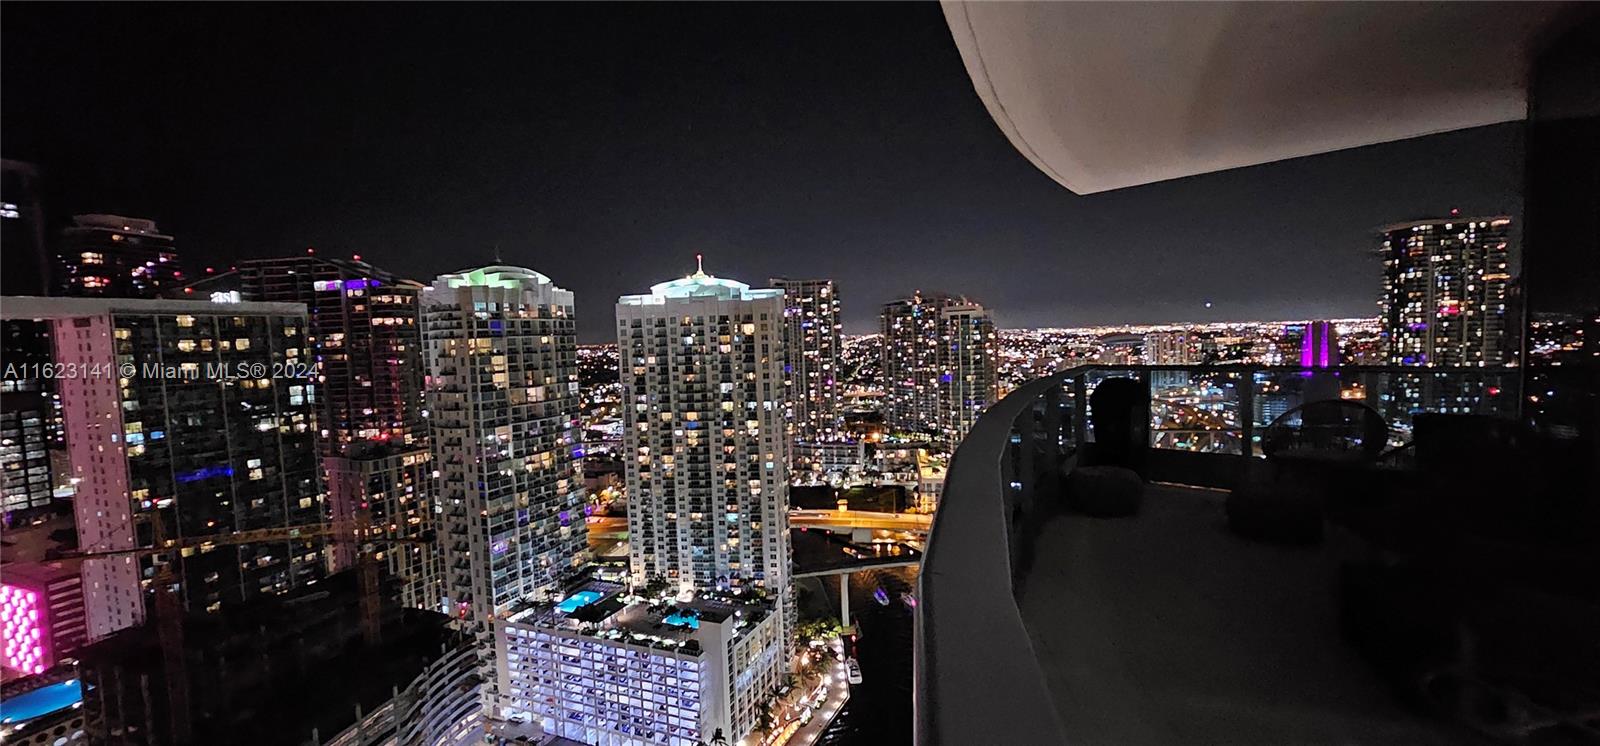 EPIC MIAMI! This 36th floor ELEGANTLY UPGRADED, HIGHLY UNIQUE & FULLY FURNISHED unit, INCLUDES a separate, additional 300 SqFt space with the same finishes, perfect as office or studio. $300k in upgrades! Enjoy wraparound 36th floor views of Bay, Miami River, Miami & Brickell skylines or sunsets. Indulge from 1 of 3 terraces balconies & every space's, floor to ceiling glass.  Dream view kitchen, highend, panelled appliances, expansive island counter and attached eat-in. Primary suite is a dream, boasting its own terrace balcony and a rain shower bathroom, with city views to blow your mind. Dine & party downstairs at World Renowned ZUMA or AREA 31. Sweat it off & get pampered at PRIVAI Spa & Fitness or take a dip in the 16th floor pools! EPIC has it all! Valet and Concierge in the building!